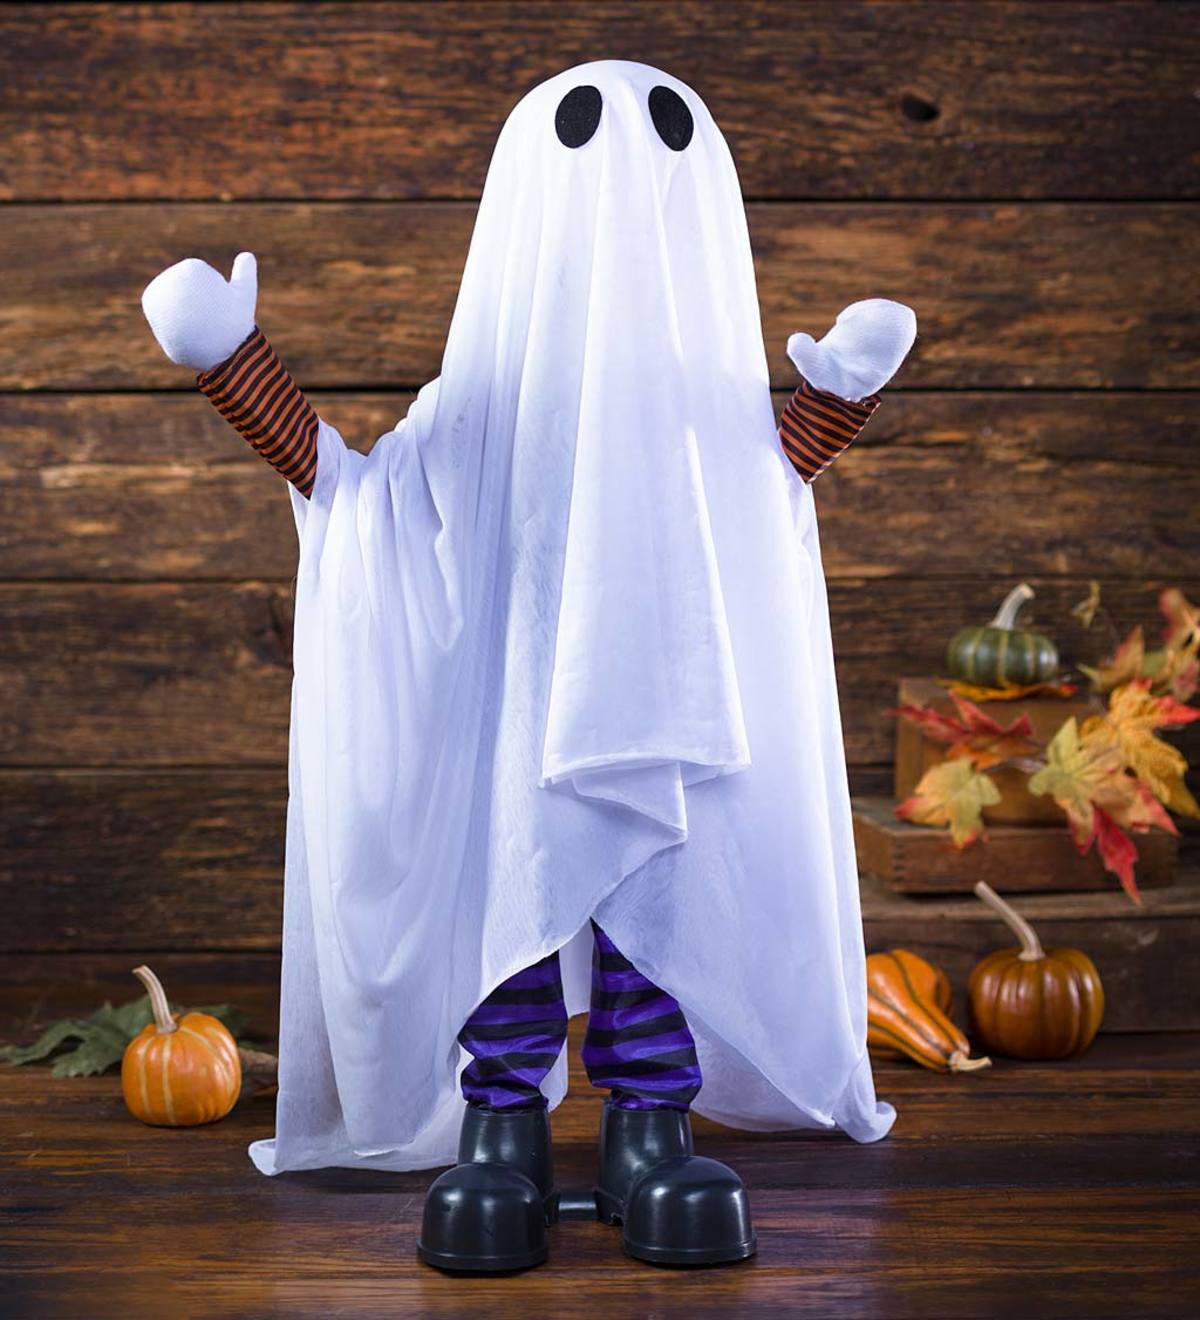 Motion-Activated Talking Ghost Halloween Decoration | Plow & Hearth